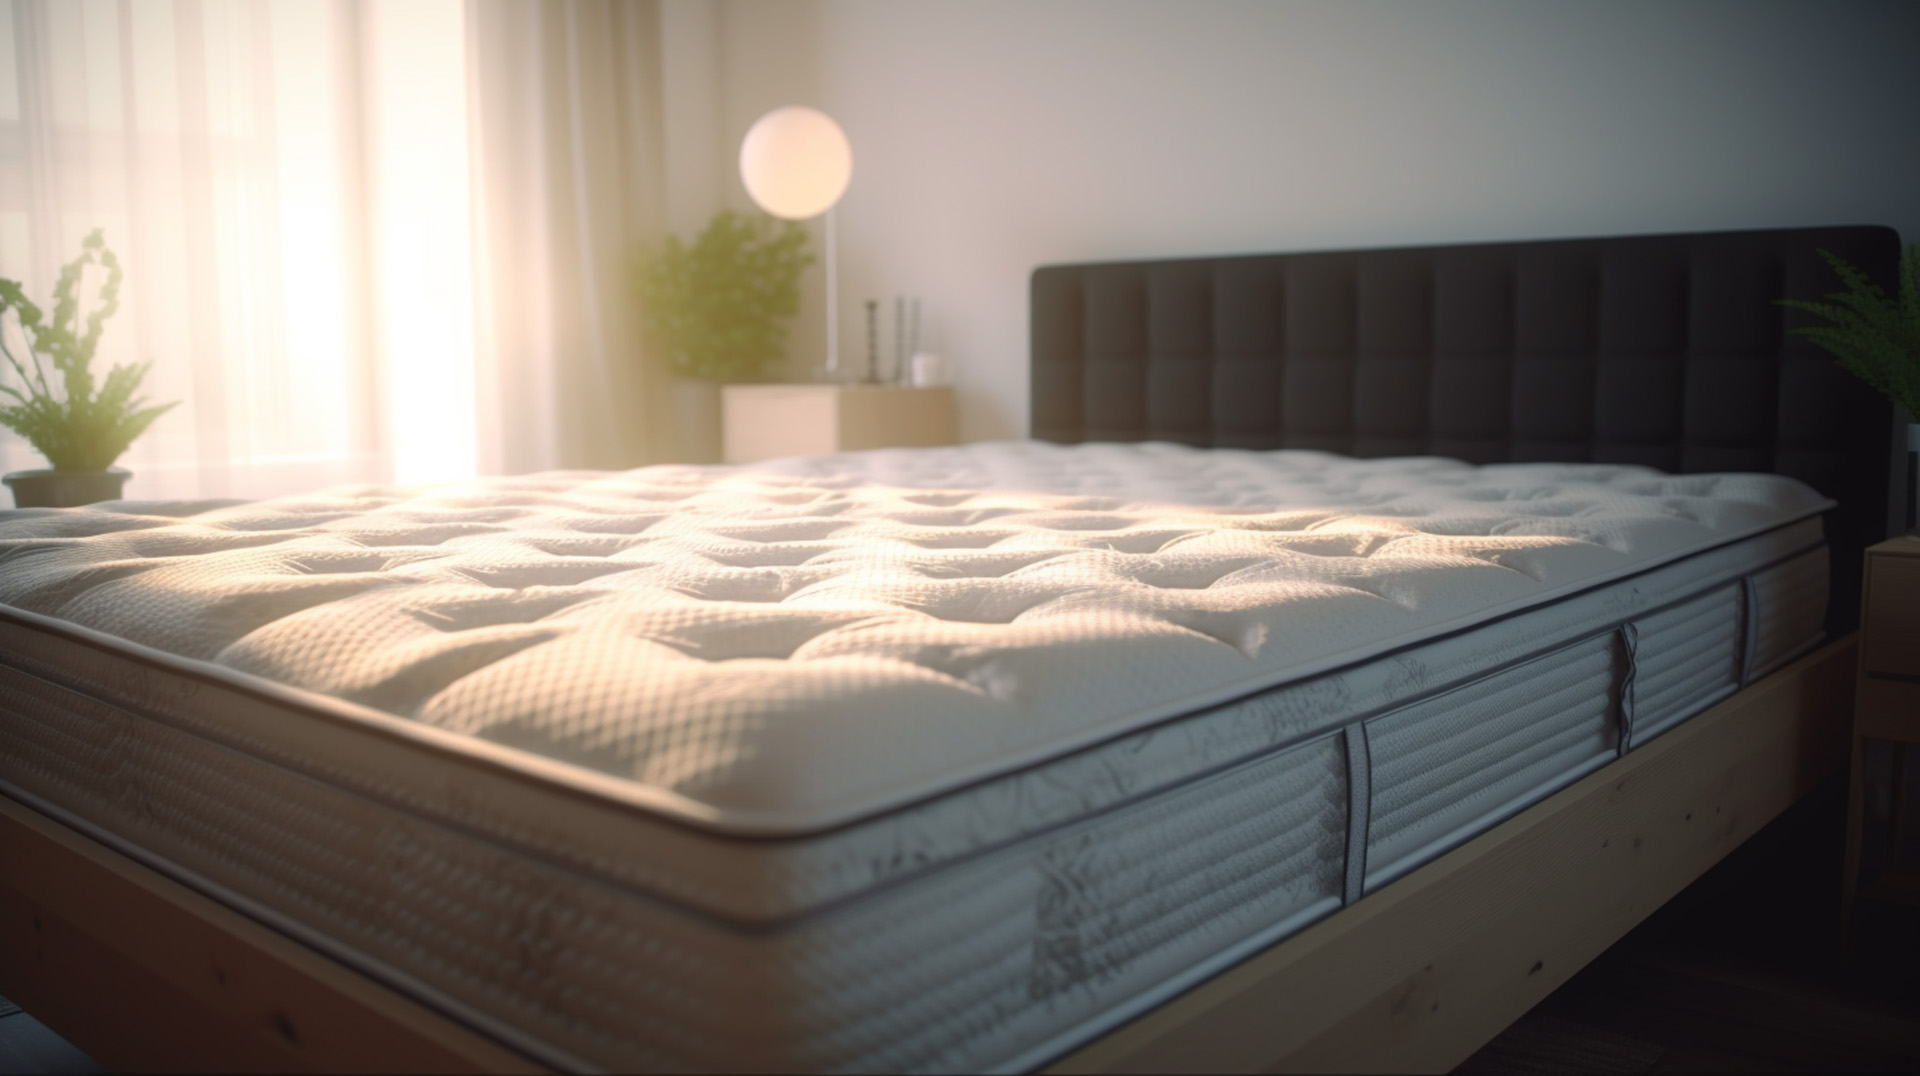 Shop Organic Mattresses and Beds in Pembroke Pines, FL